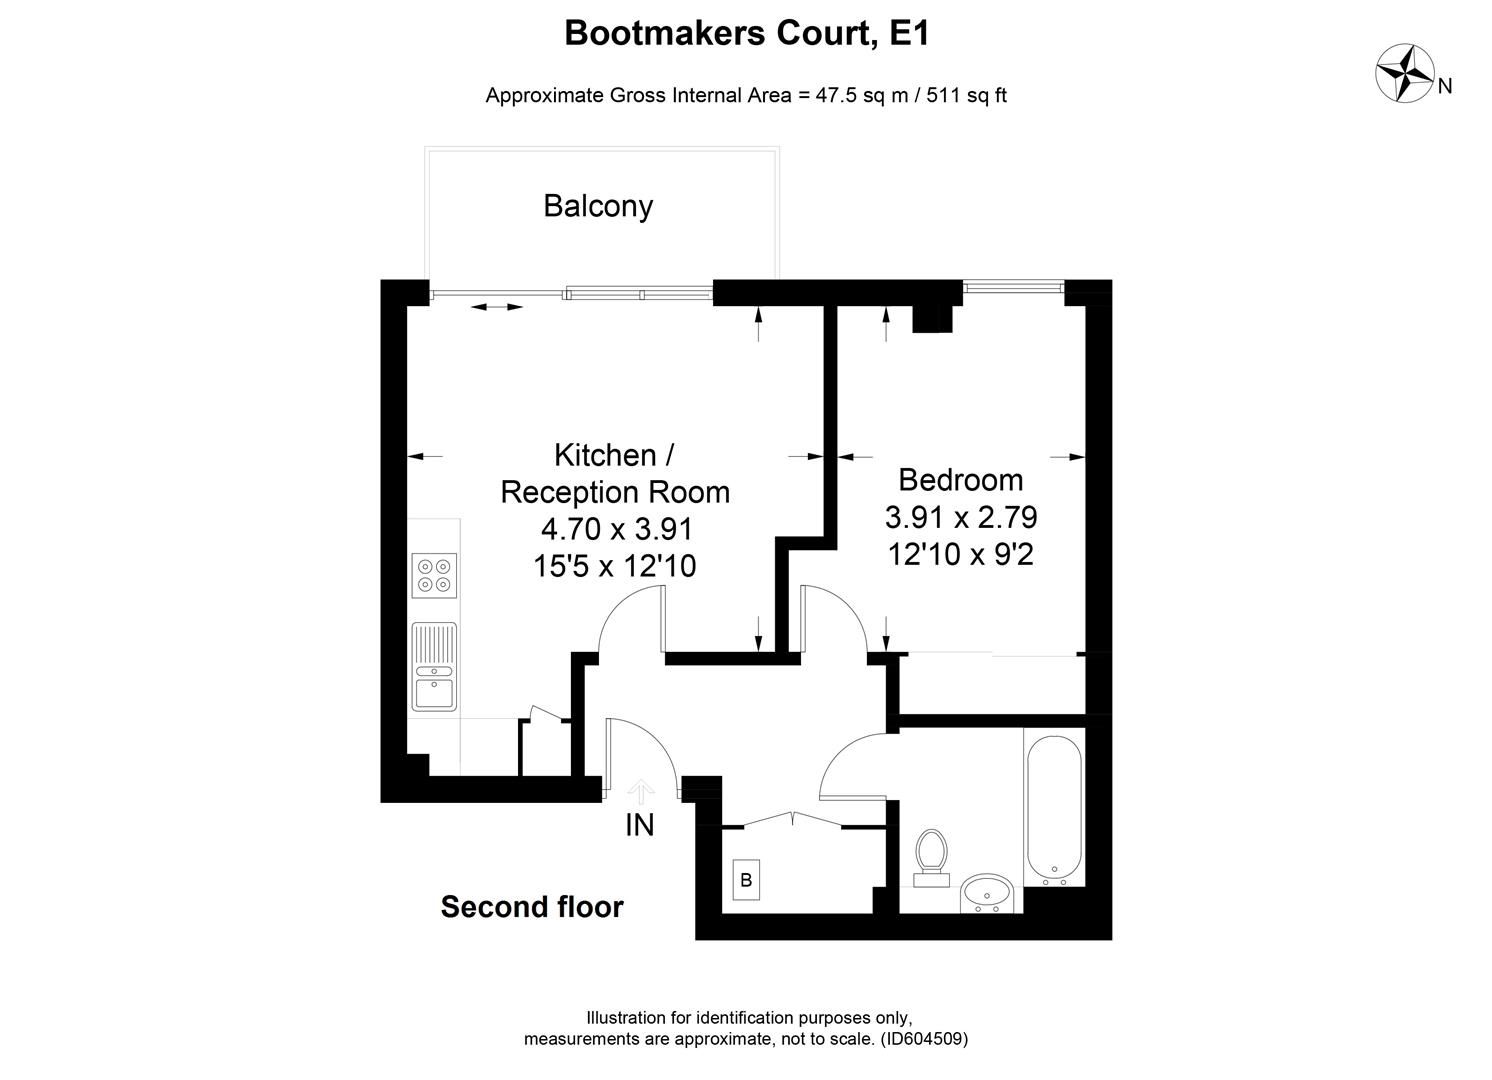 1-bed-flat-to-rent-in-bootmakers-court-ben-jonson-road-limehouse